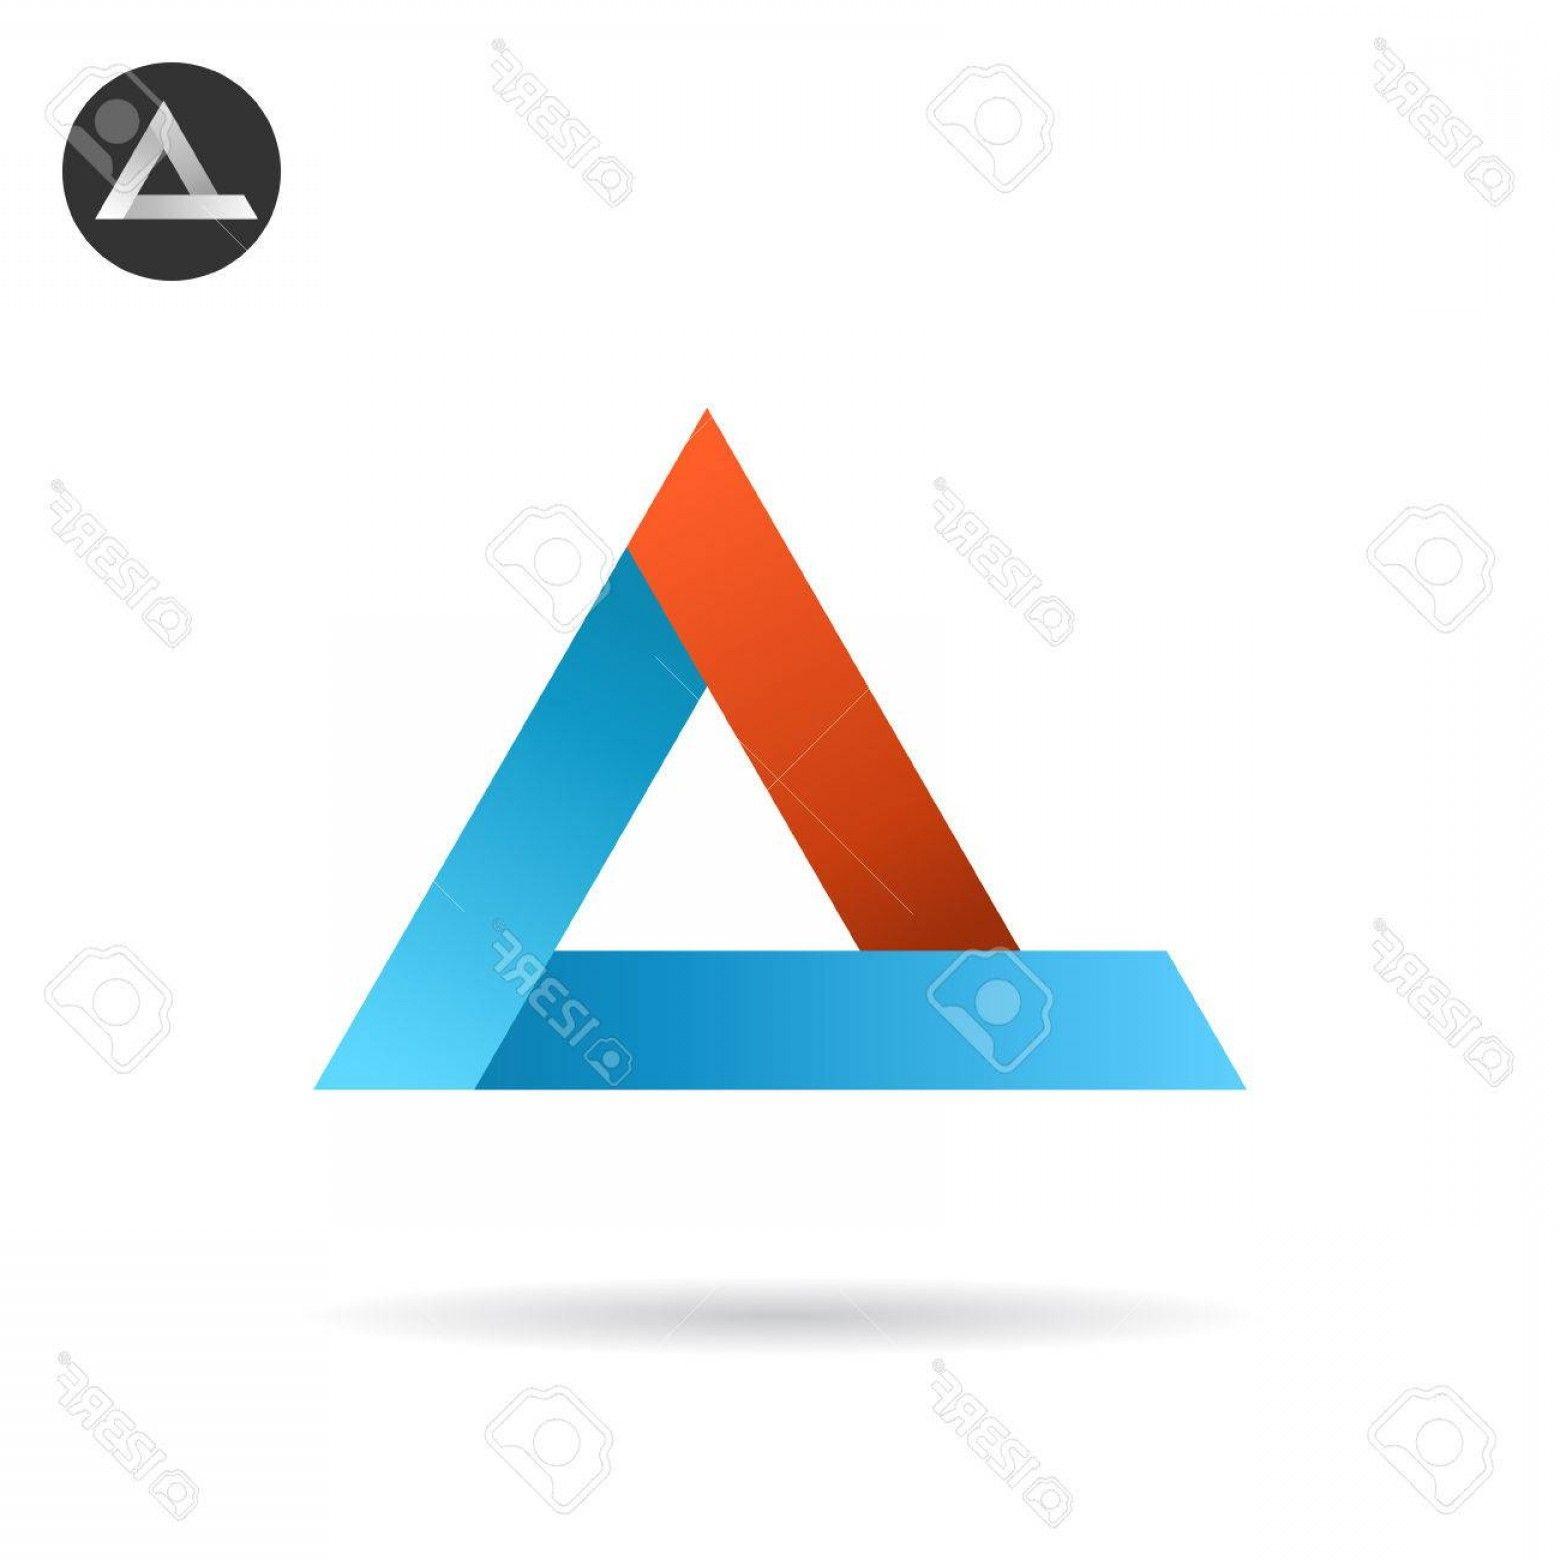 Red White Blue Arrow Logo - Photostock Vector Delta Arrow Logo In Ribbon Style Red And Blue